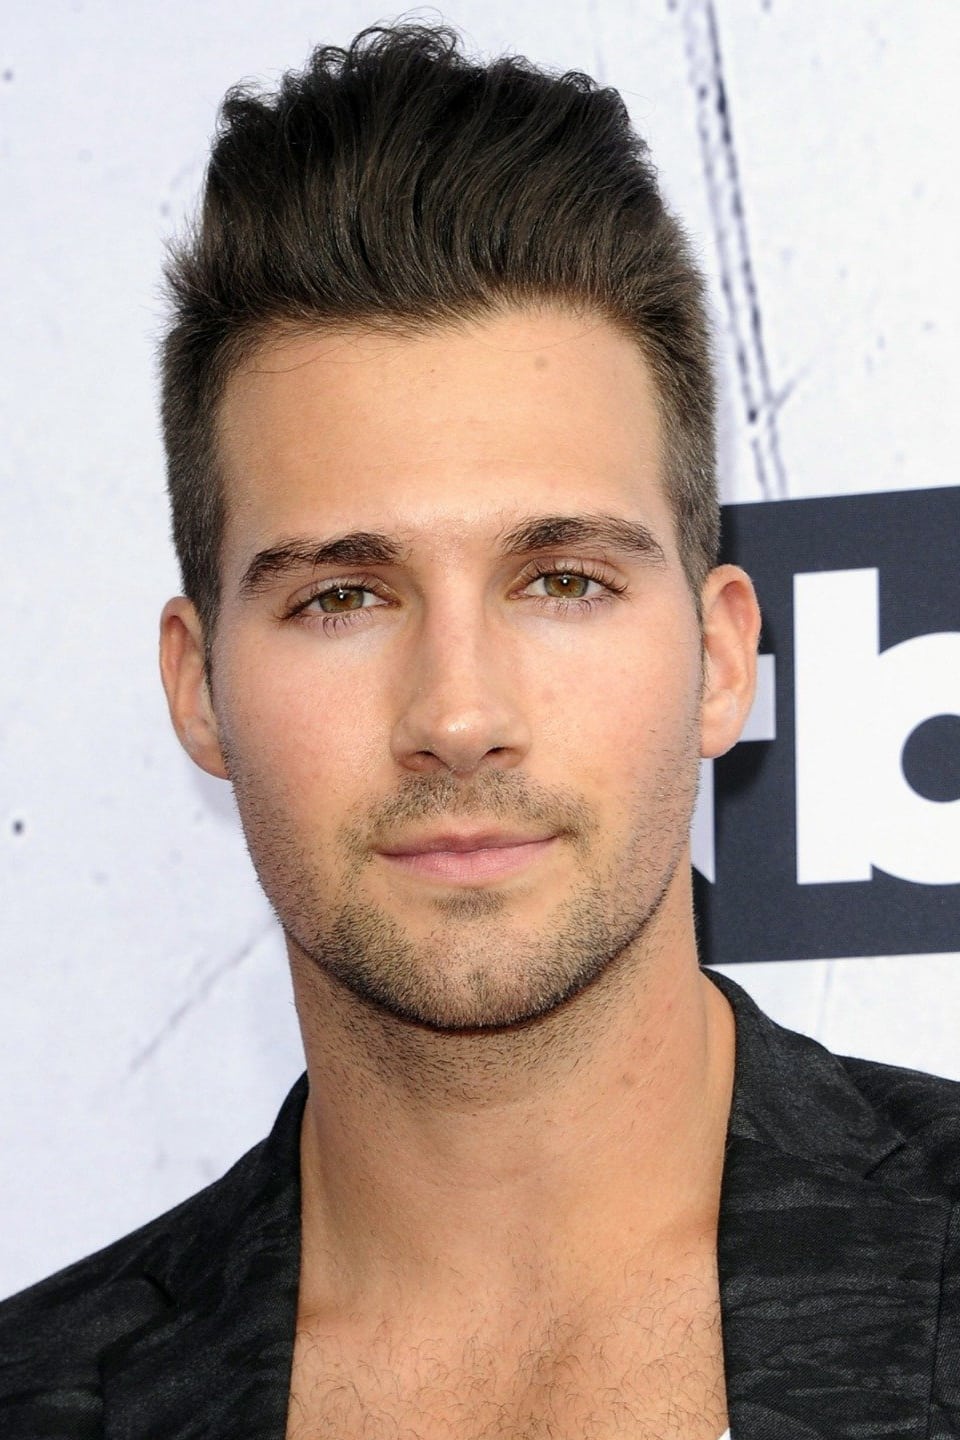 Happy 32nd birthday to (James Maslow)! The actor who played James Diamond from 